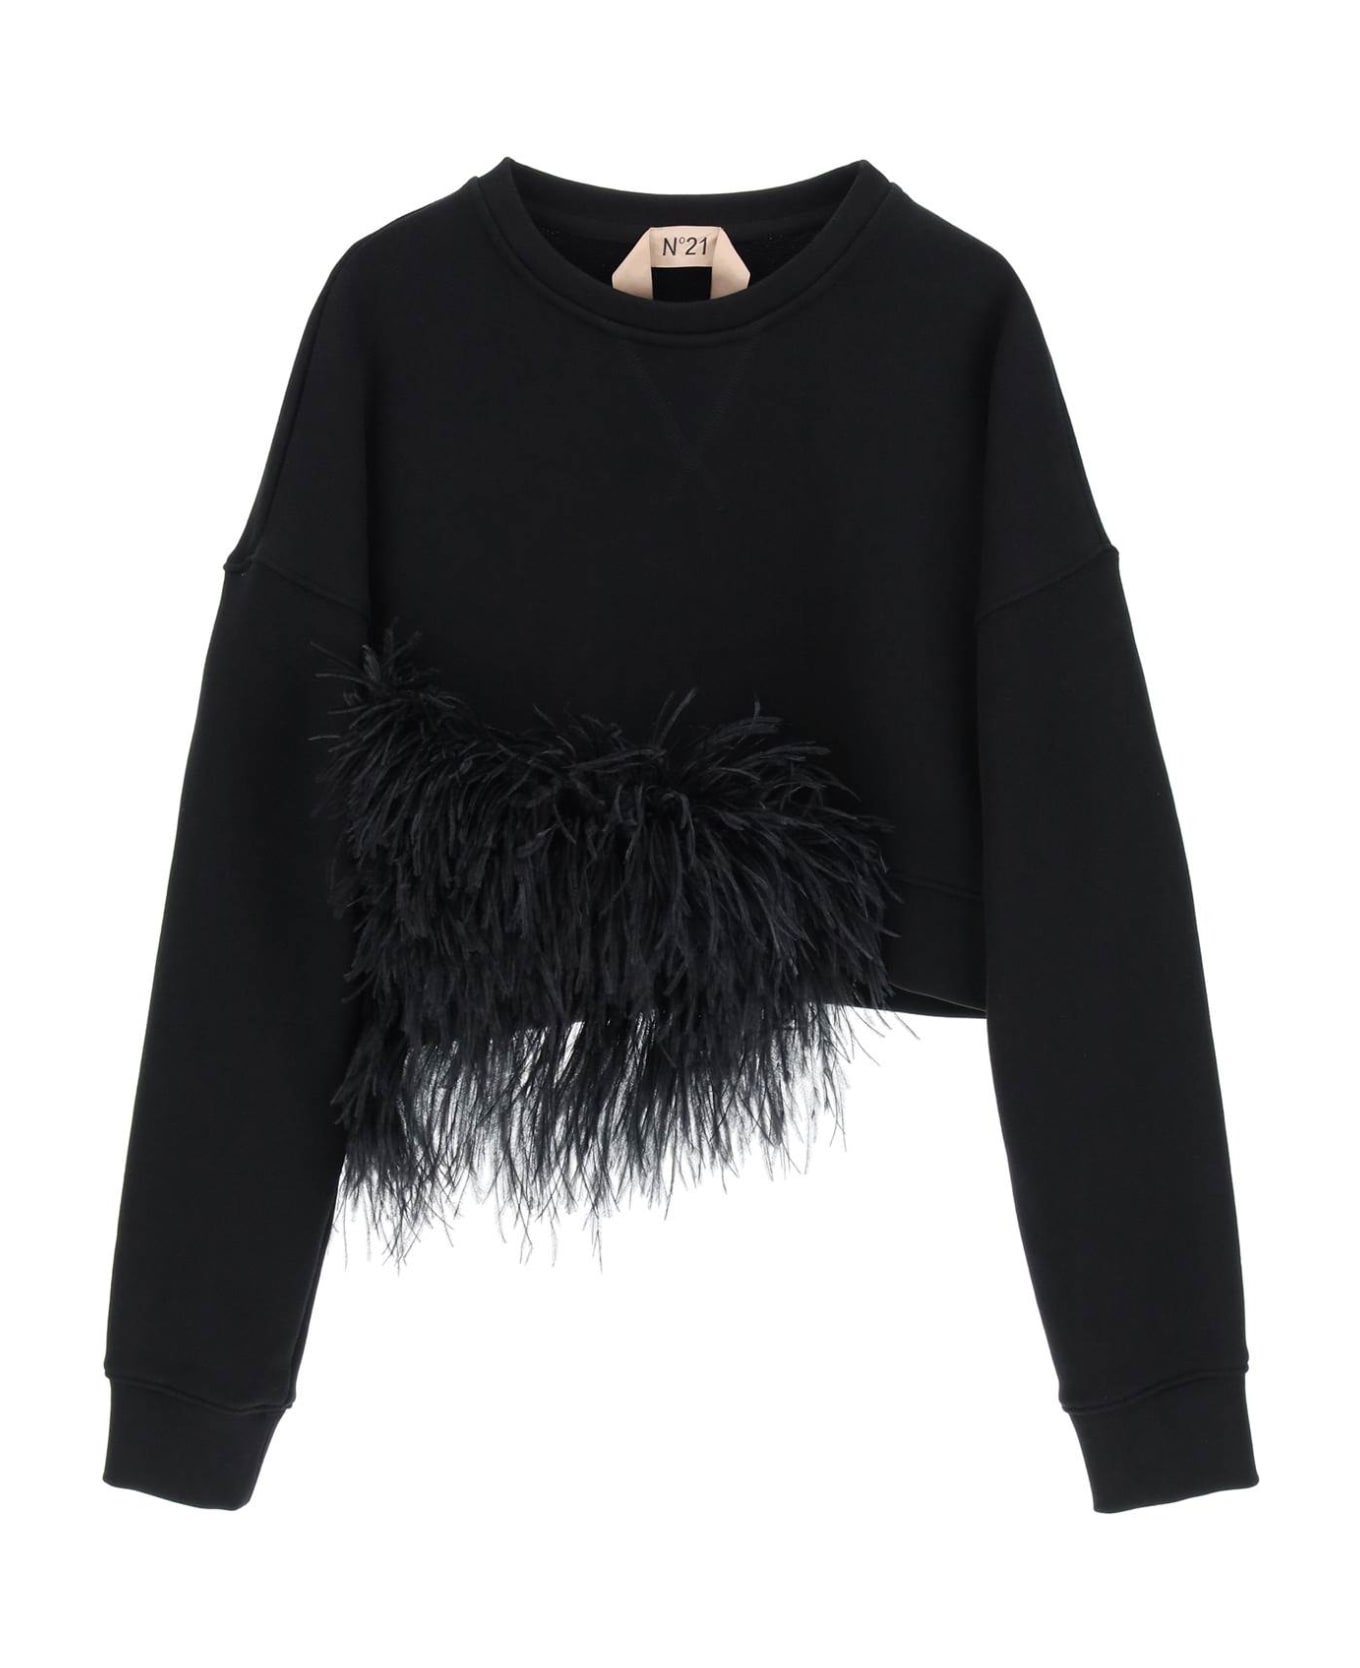 N.21 Cropped Sweatshirt With Feathers - NERO (Black)